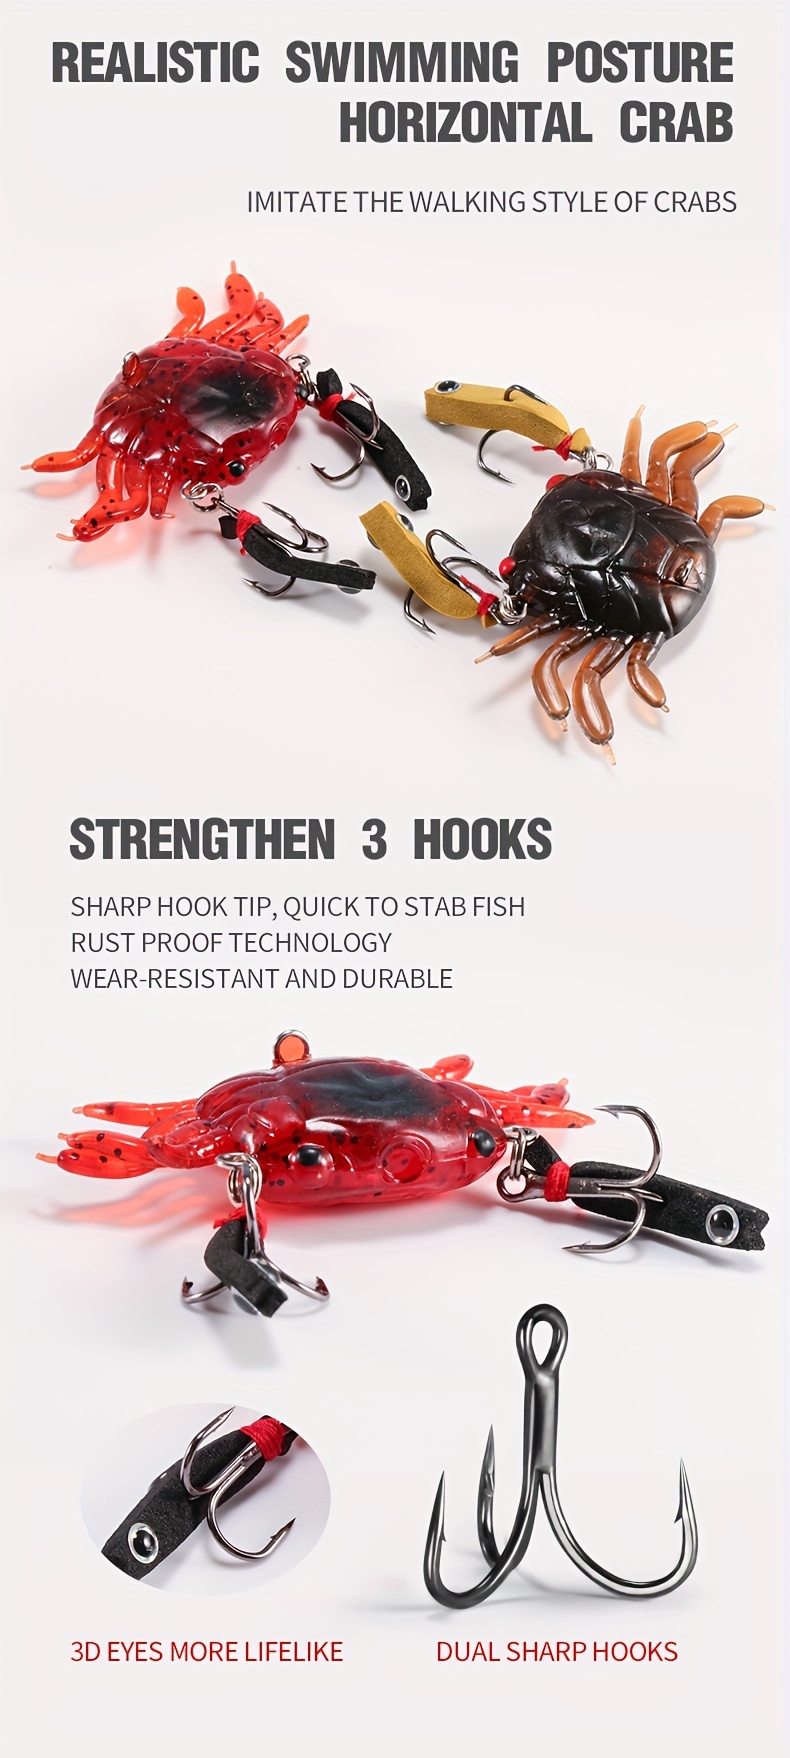  COOLHIYA Fake Crab Artificial Crab Lure Bait Slingshot  Artificial Fishing Baits Simulation Baits Crab Artificial Bait Crab Snare  Crab Bait Saltwater Bait Fishing Lure with Hook Brine 3D : Sports